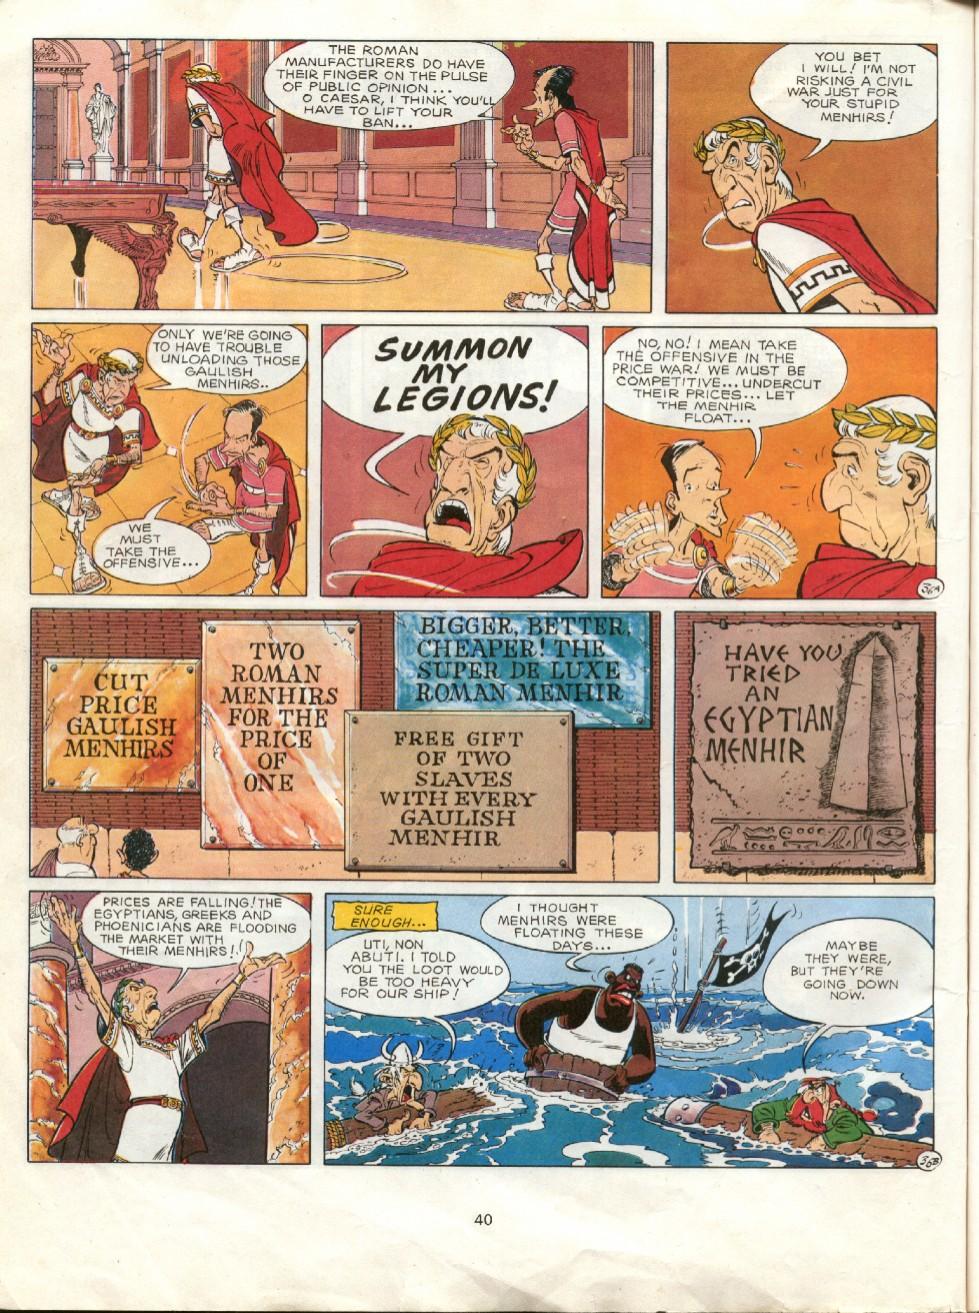 23 Obelix And Co | Read 23 Obelix And Co comic online in high quality ...